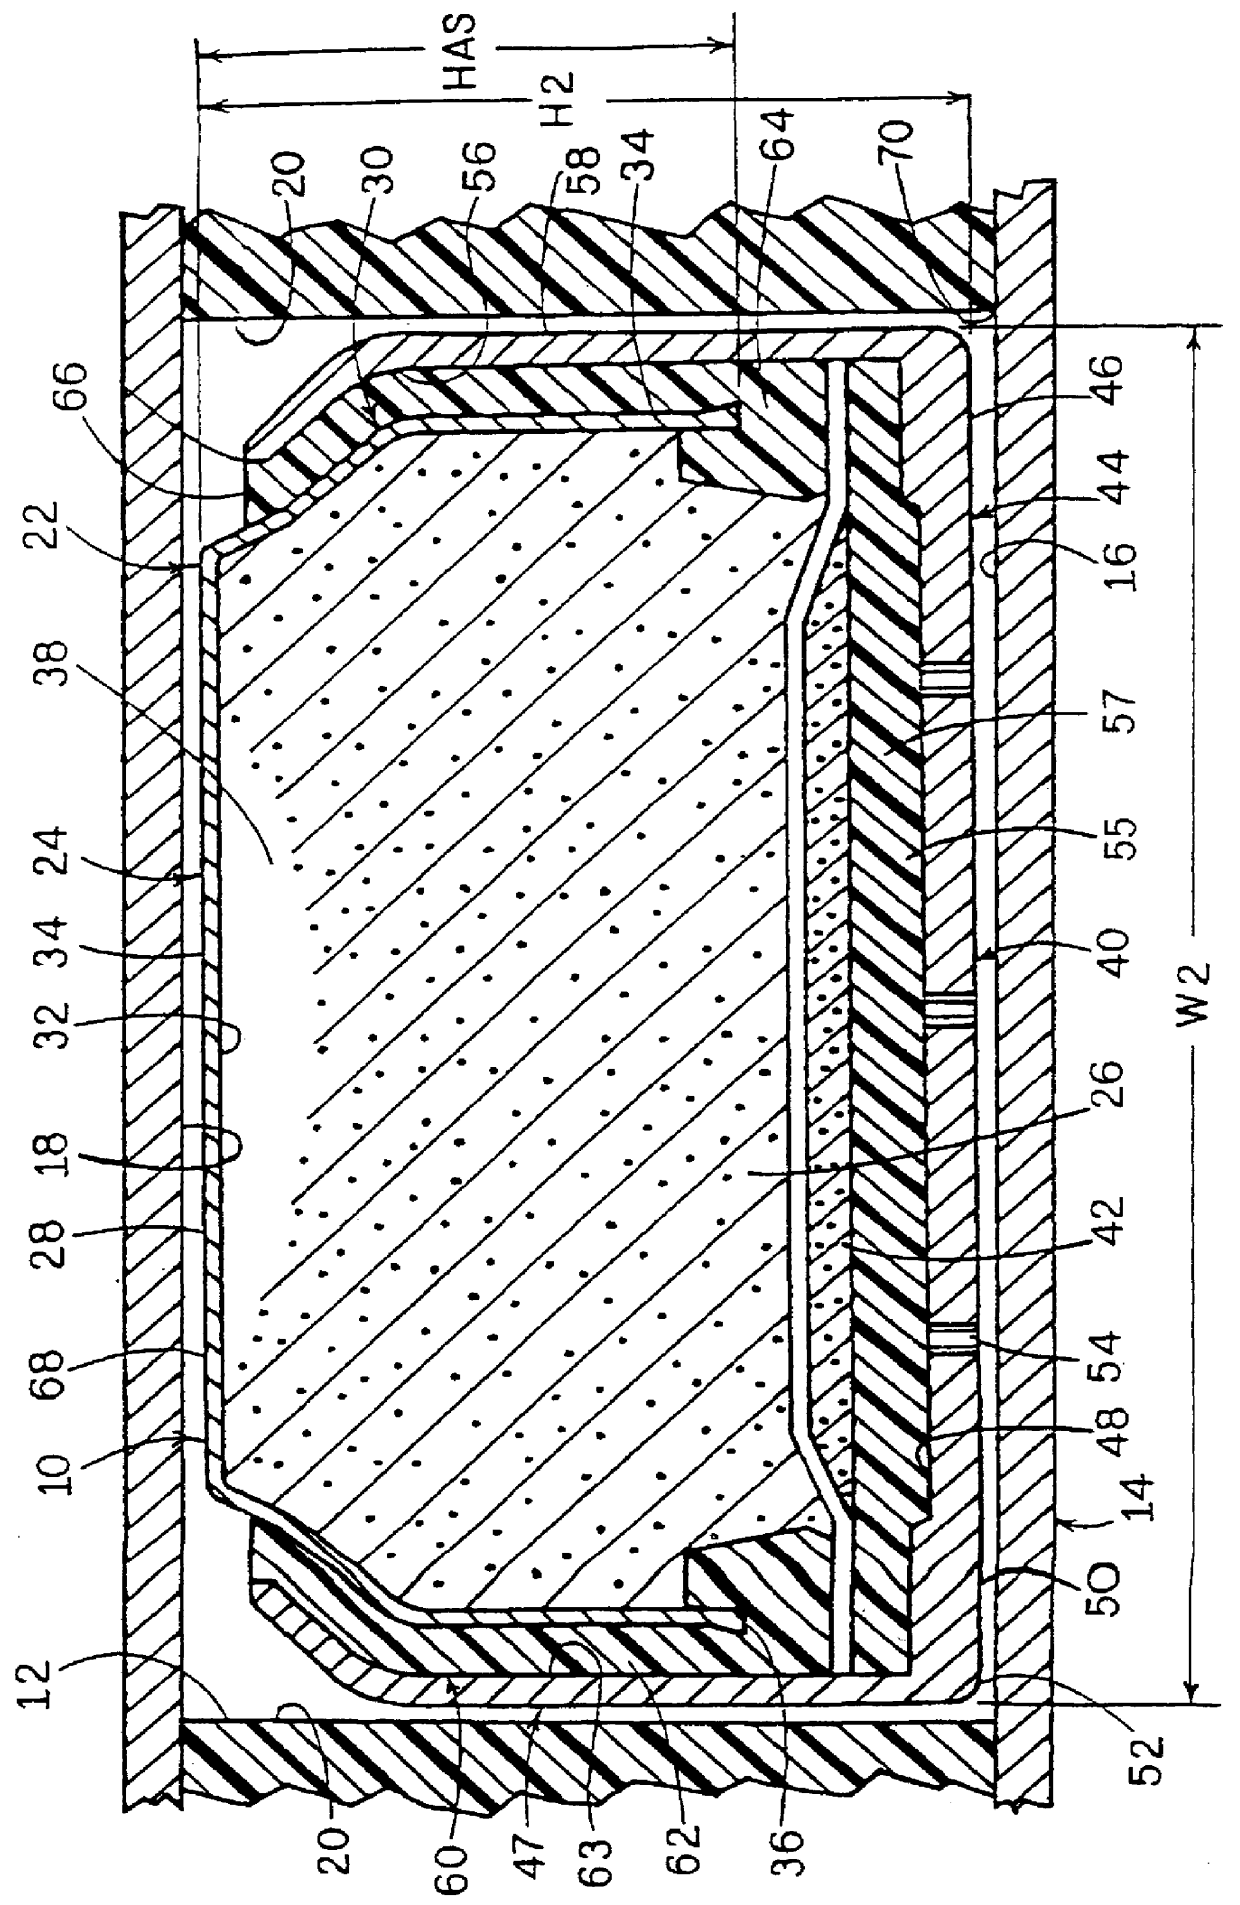 Thin walled electrochemical cell